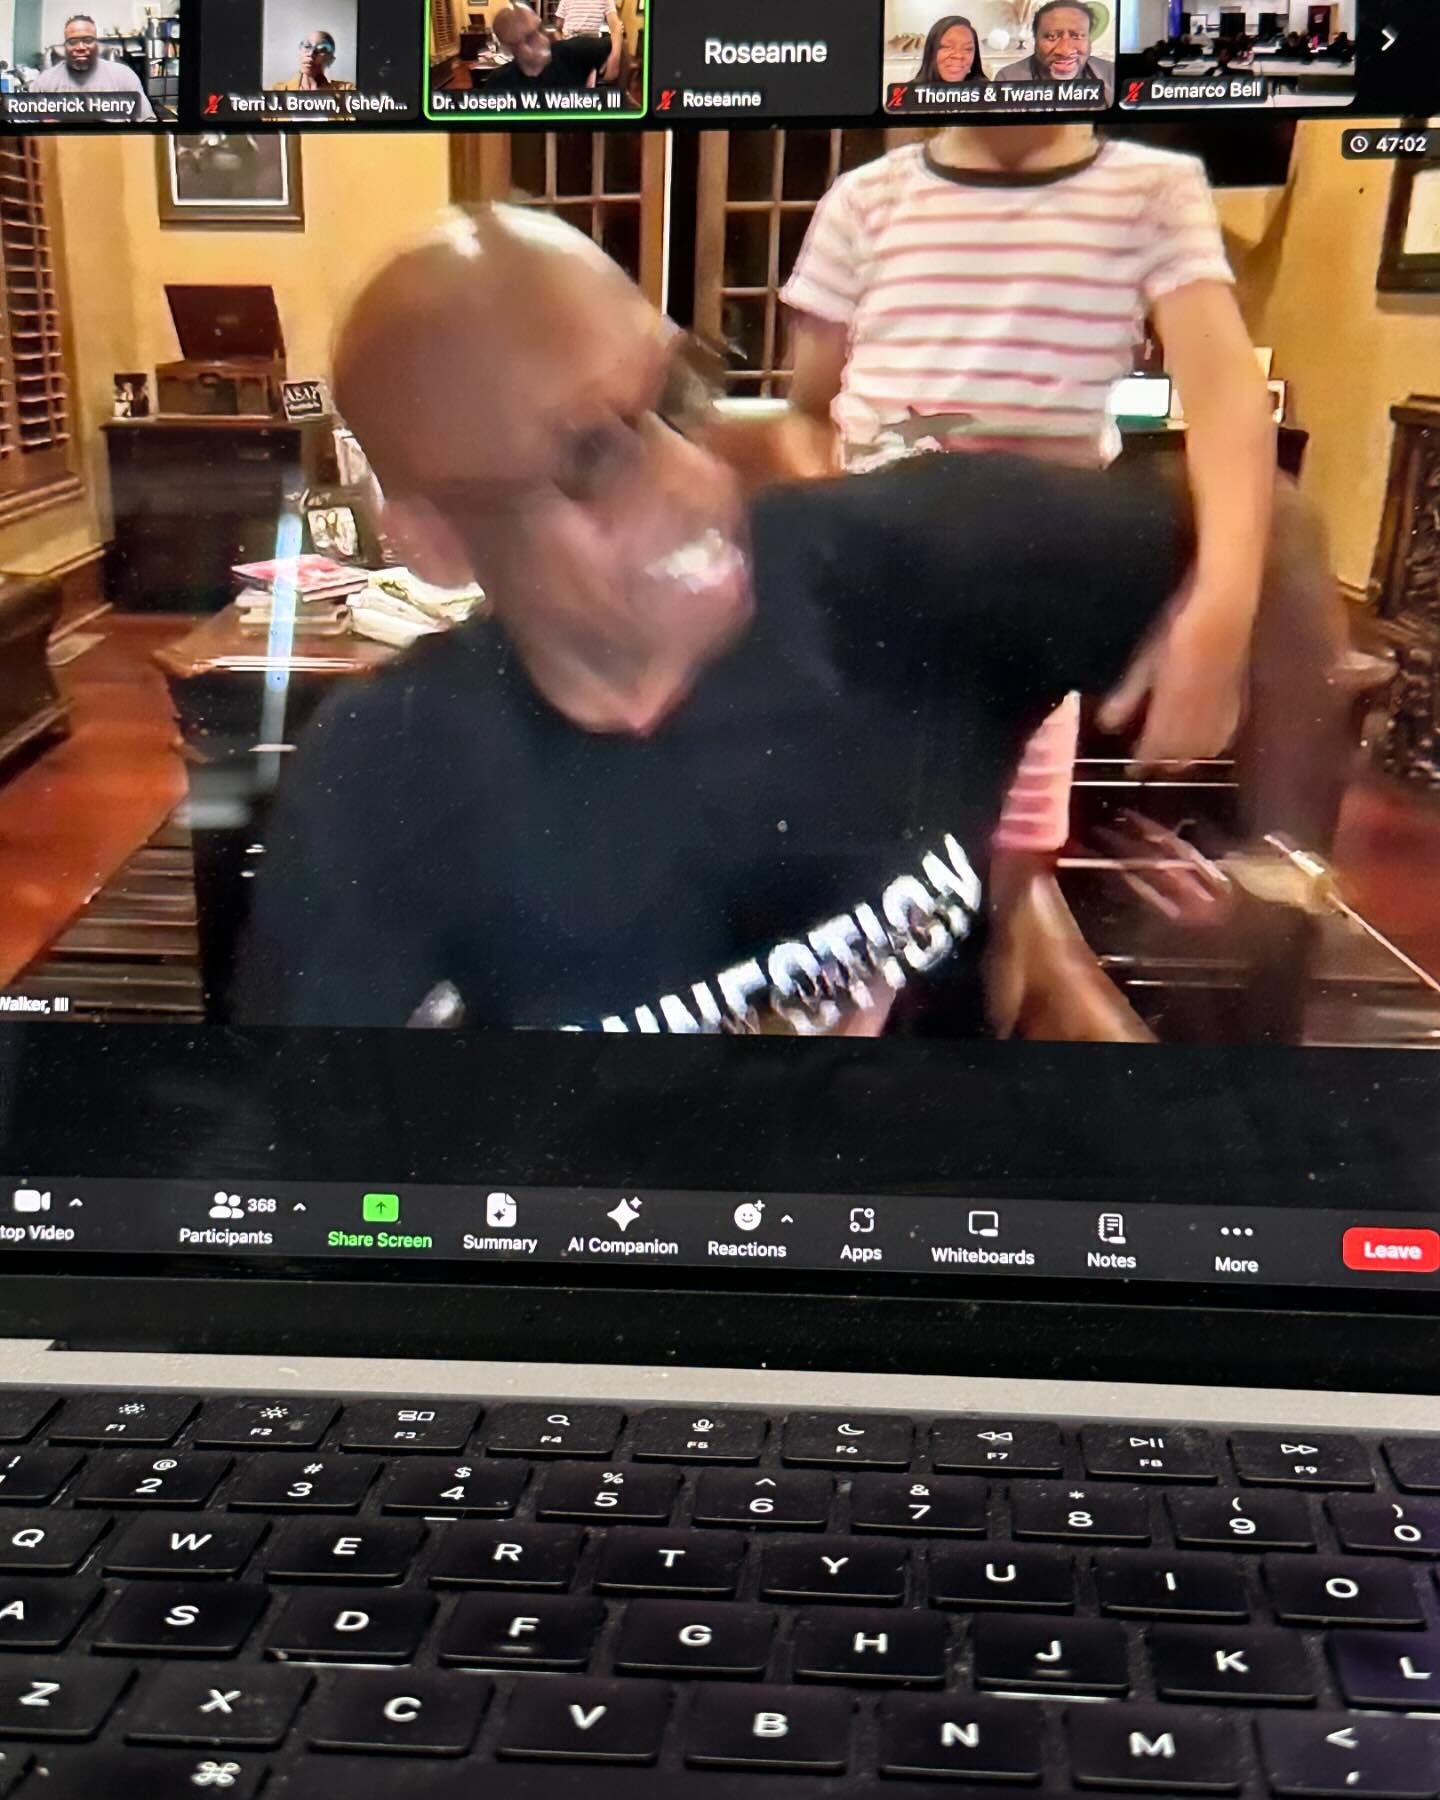 Showing the best side of bishop @josephwalker3 as he imparted some nuggets of wisdom on &ldquo;Connection is the new currency&rdquo;. Collaboration is key. Synergy, scale, success and sustainability. Doing this while his son wanting his attention. Aw